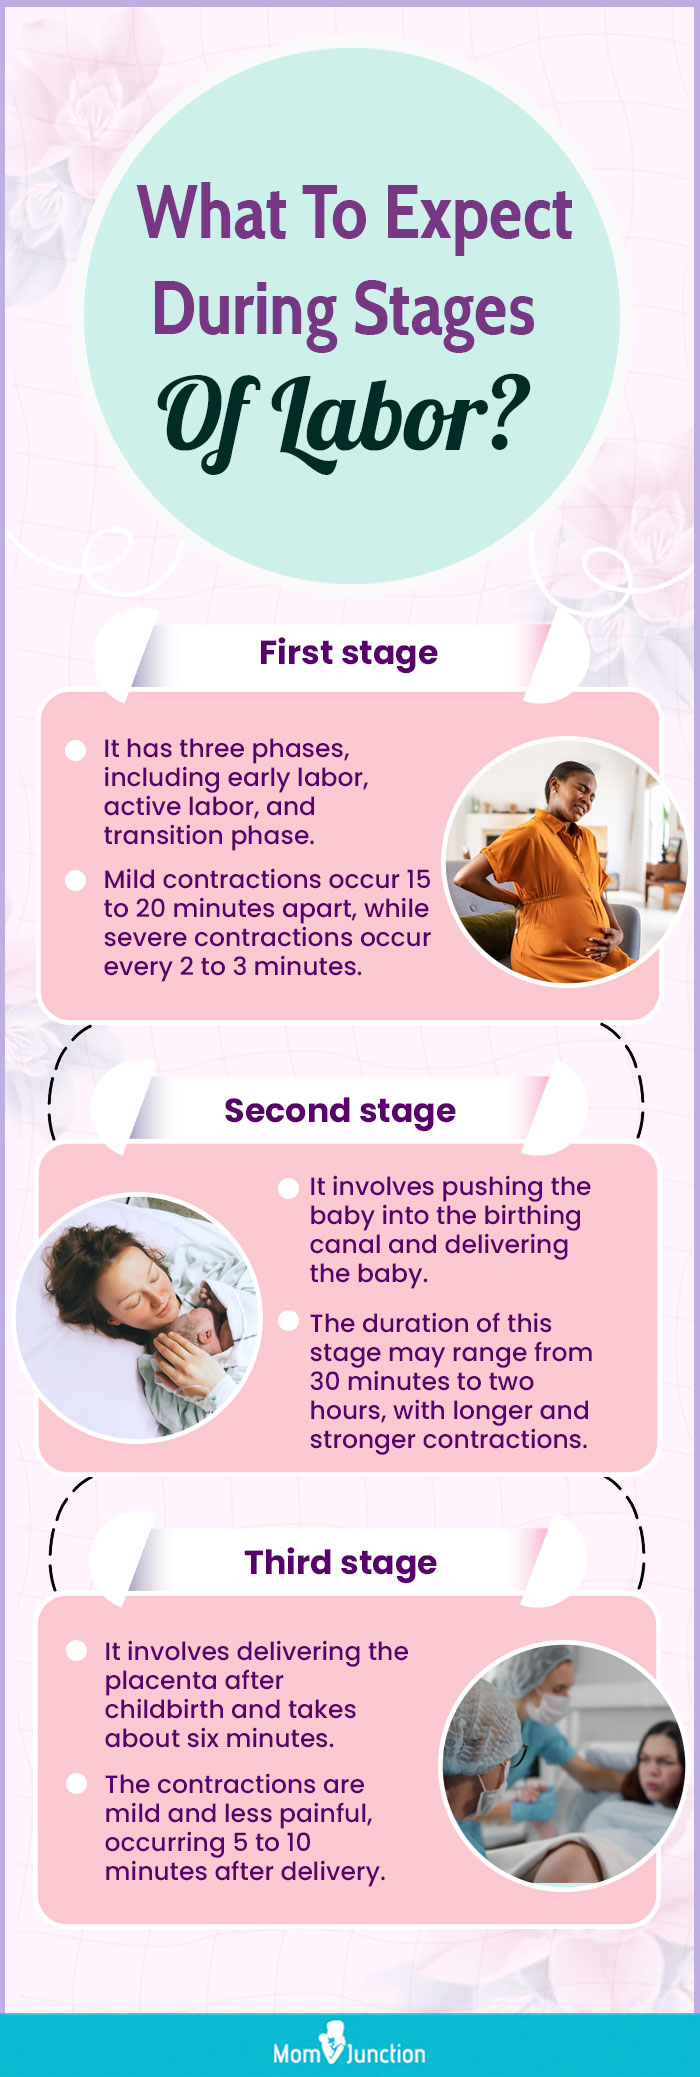 what to expect during stages of labor (infographic)